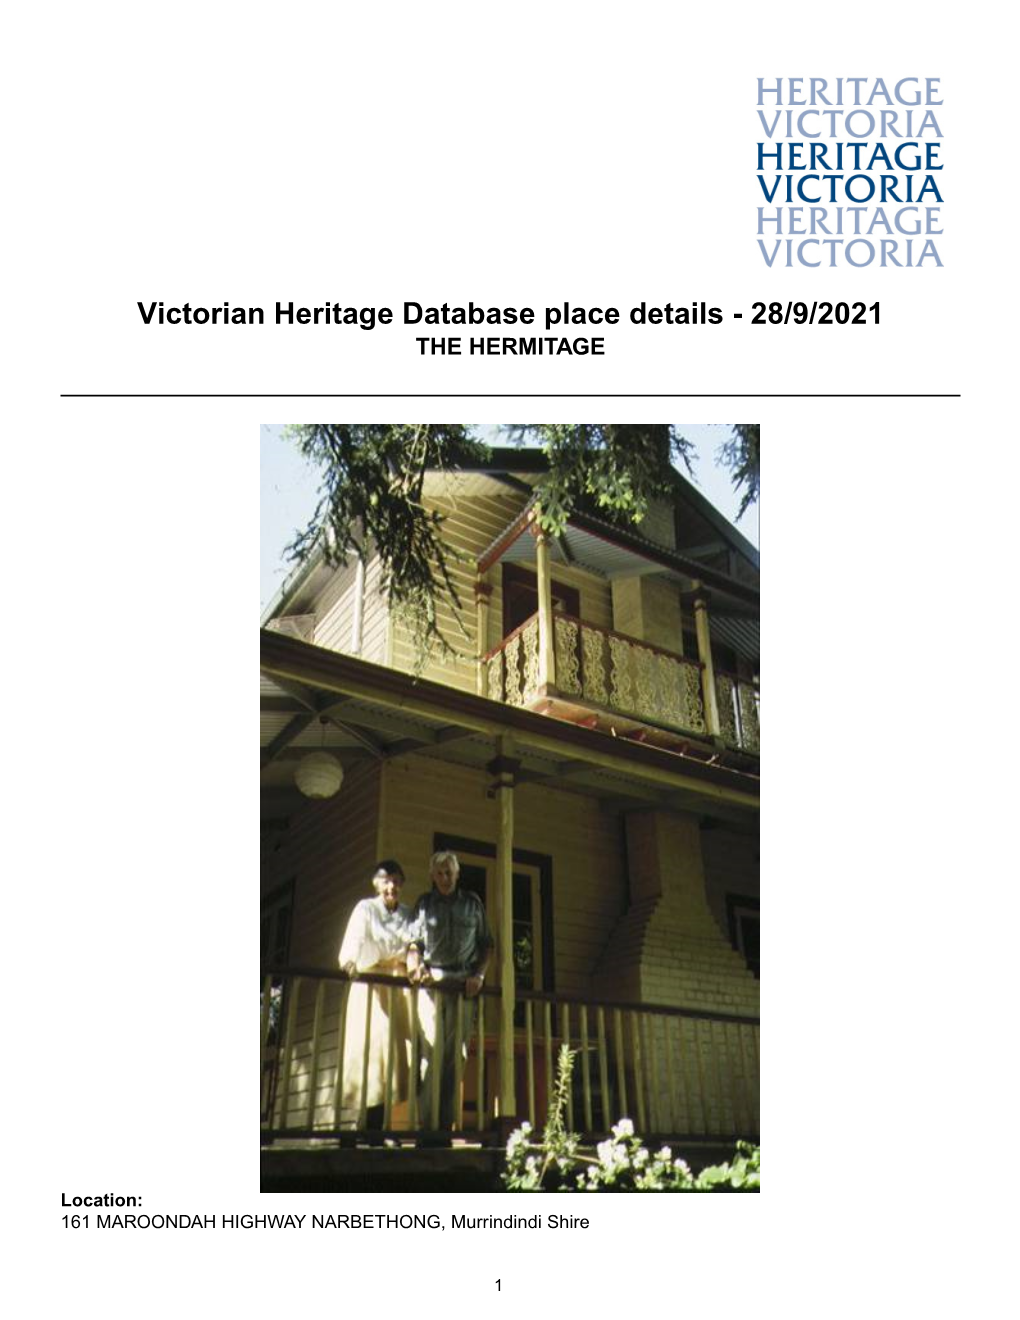 Victorian Heritage Database Place Details - 28/9/2021 the HERMITAGE